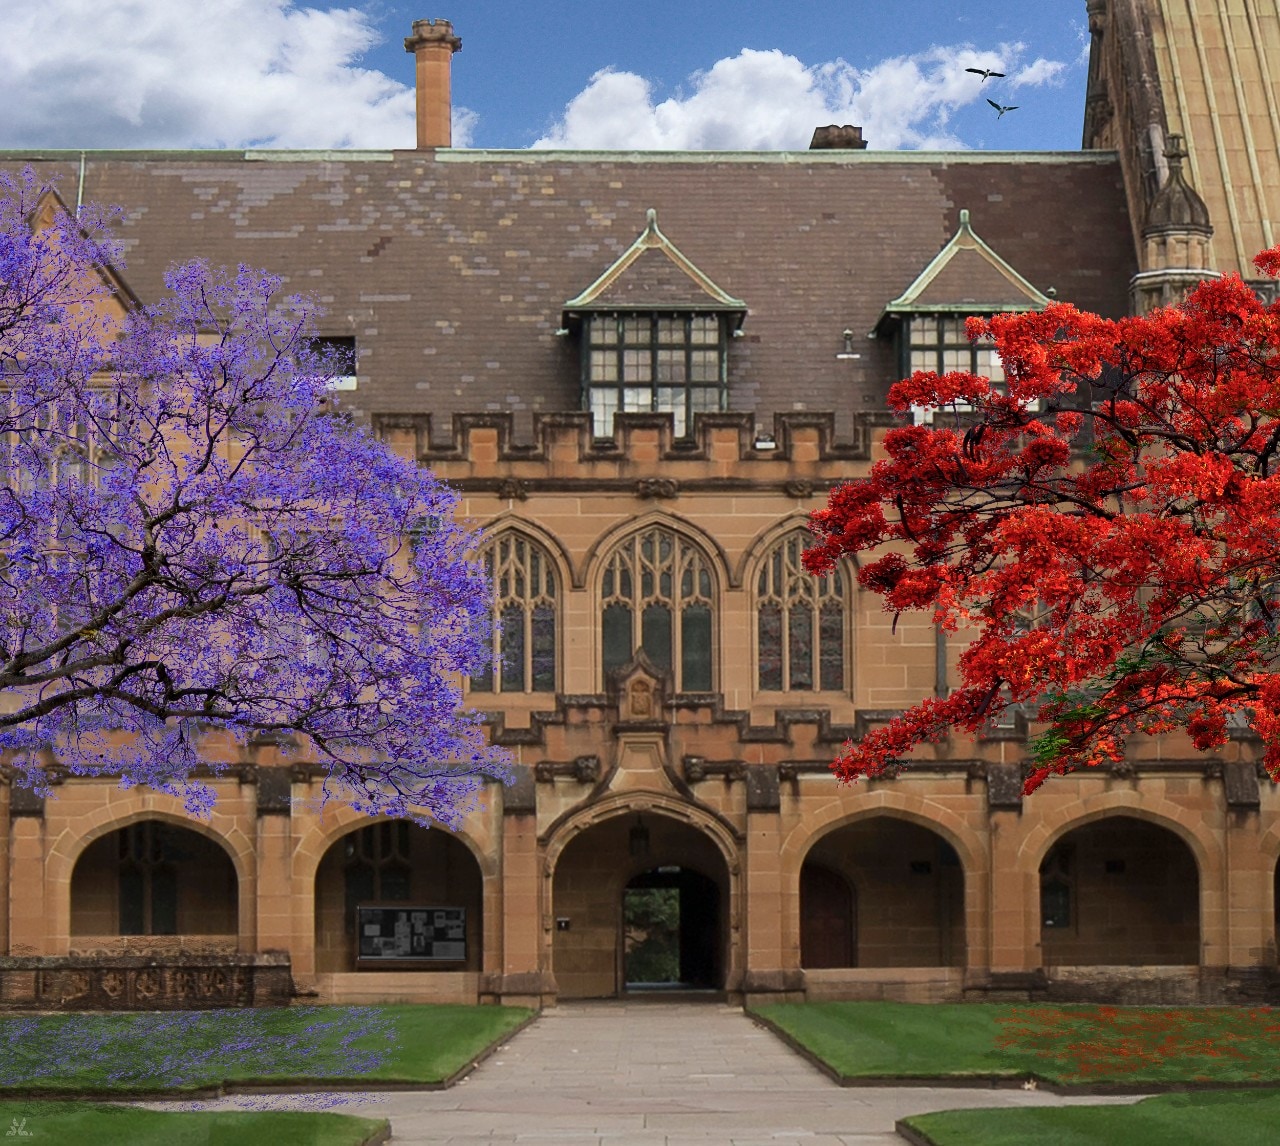 Artist’s impression of the jacaranda tree and flame tree in bloom. Credit: The University of Sydney.